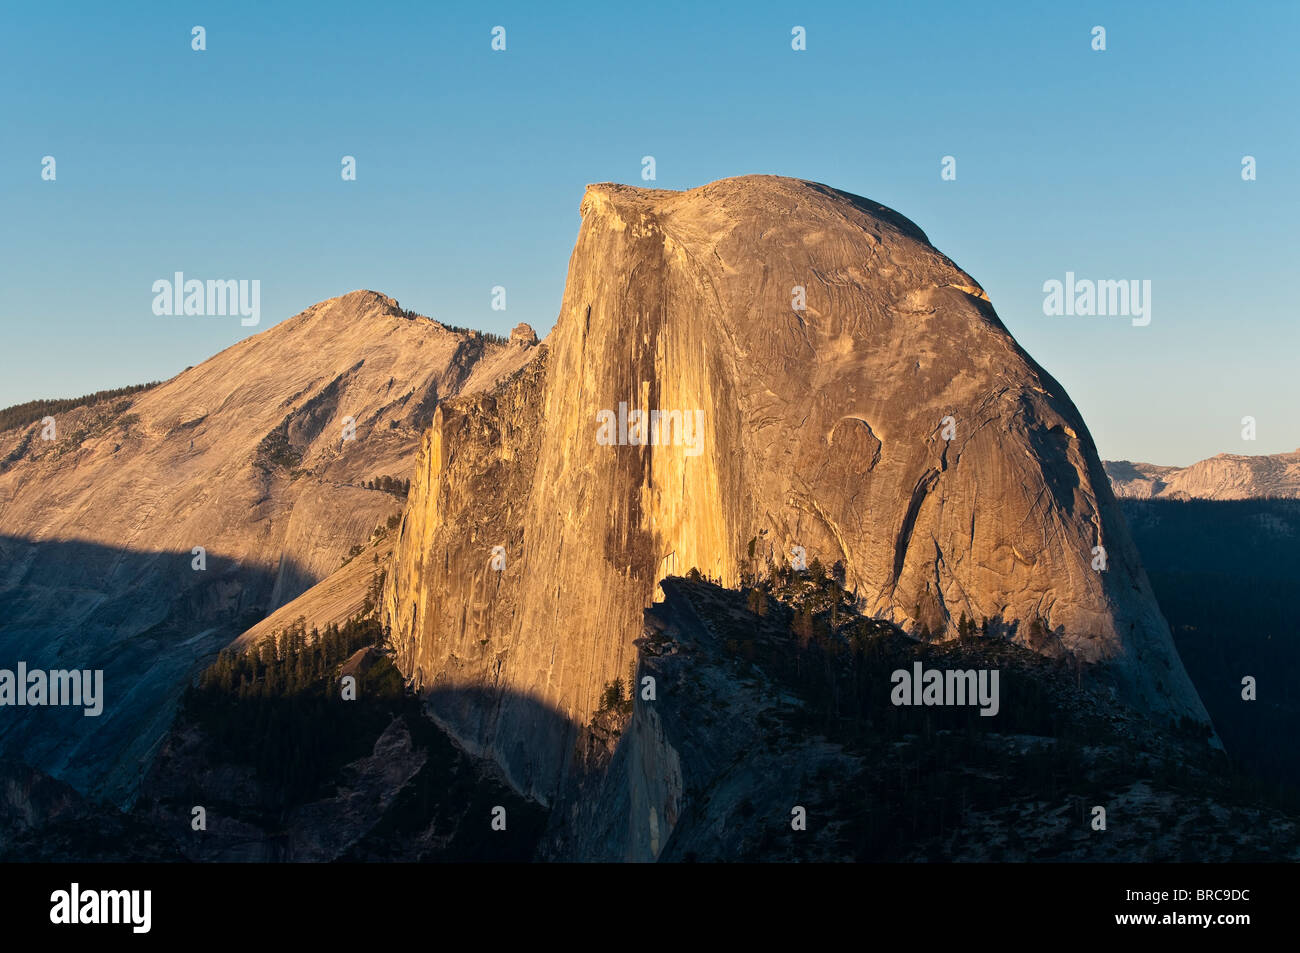 Half Dome Mountain at sunset seen from Glacier Point, Yosemite National Park, California, USA Stock Photo